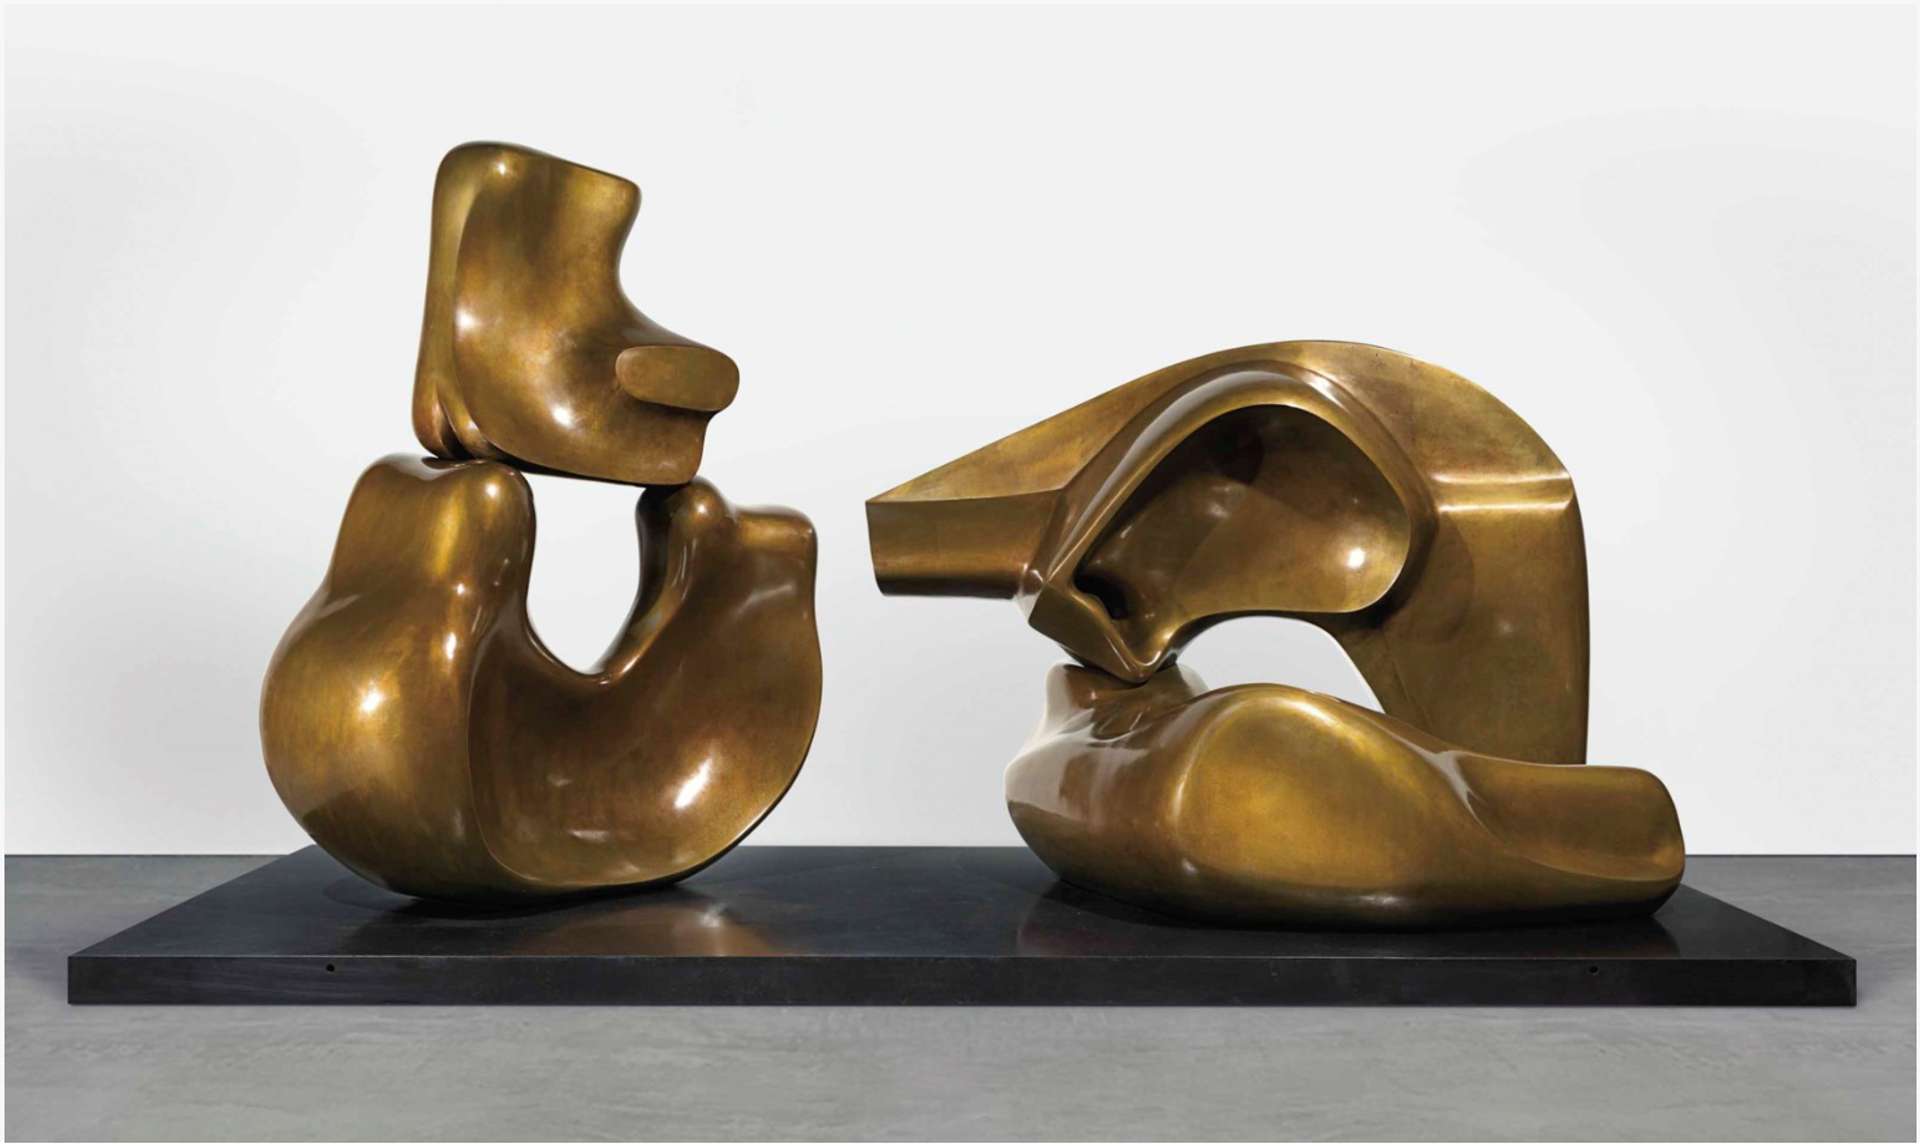 Henry Moore's bronze sculpture featuring four fragments arranged in pairs. On the left side, two pieces are placed together, with a smaller fragment balancing on the edges of a larger bottom piece. The larger piece showcases a concaved void, adding depth and balance to the composition. On the right side, there are two additional pieces: one laid down in an L-shape, while the other extends upward and crosses over the first shape at a right angle.